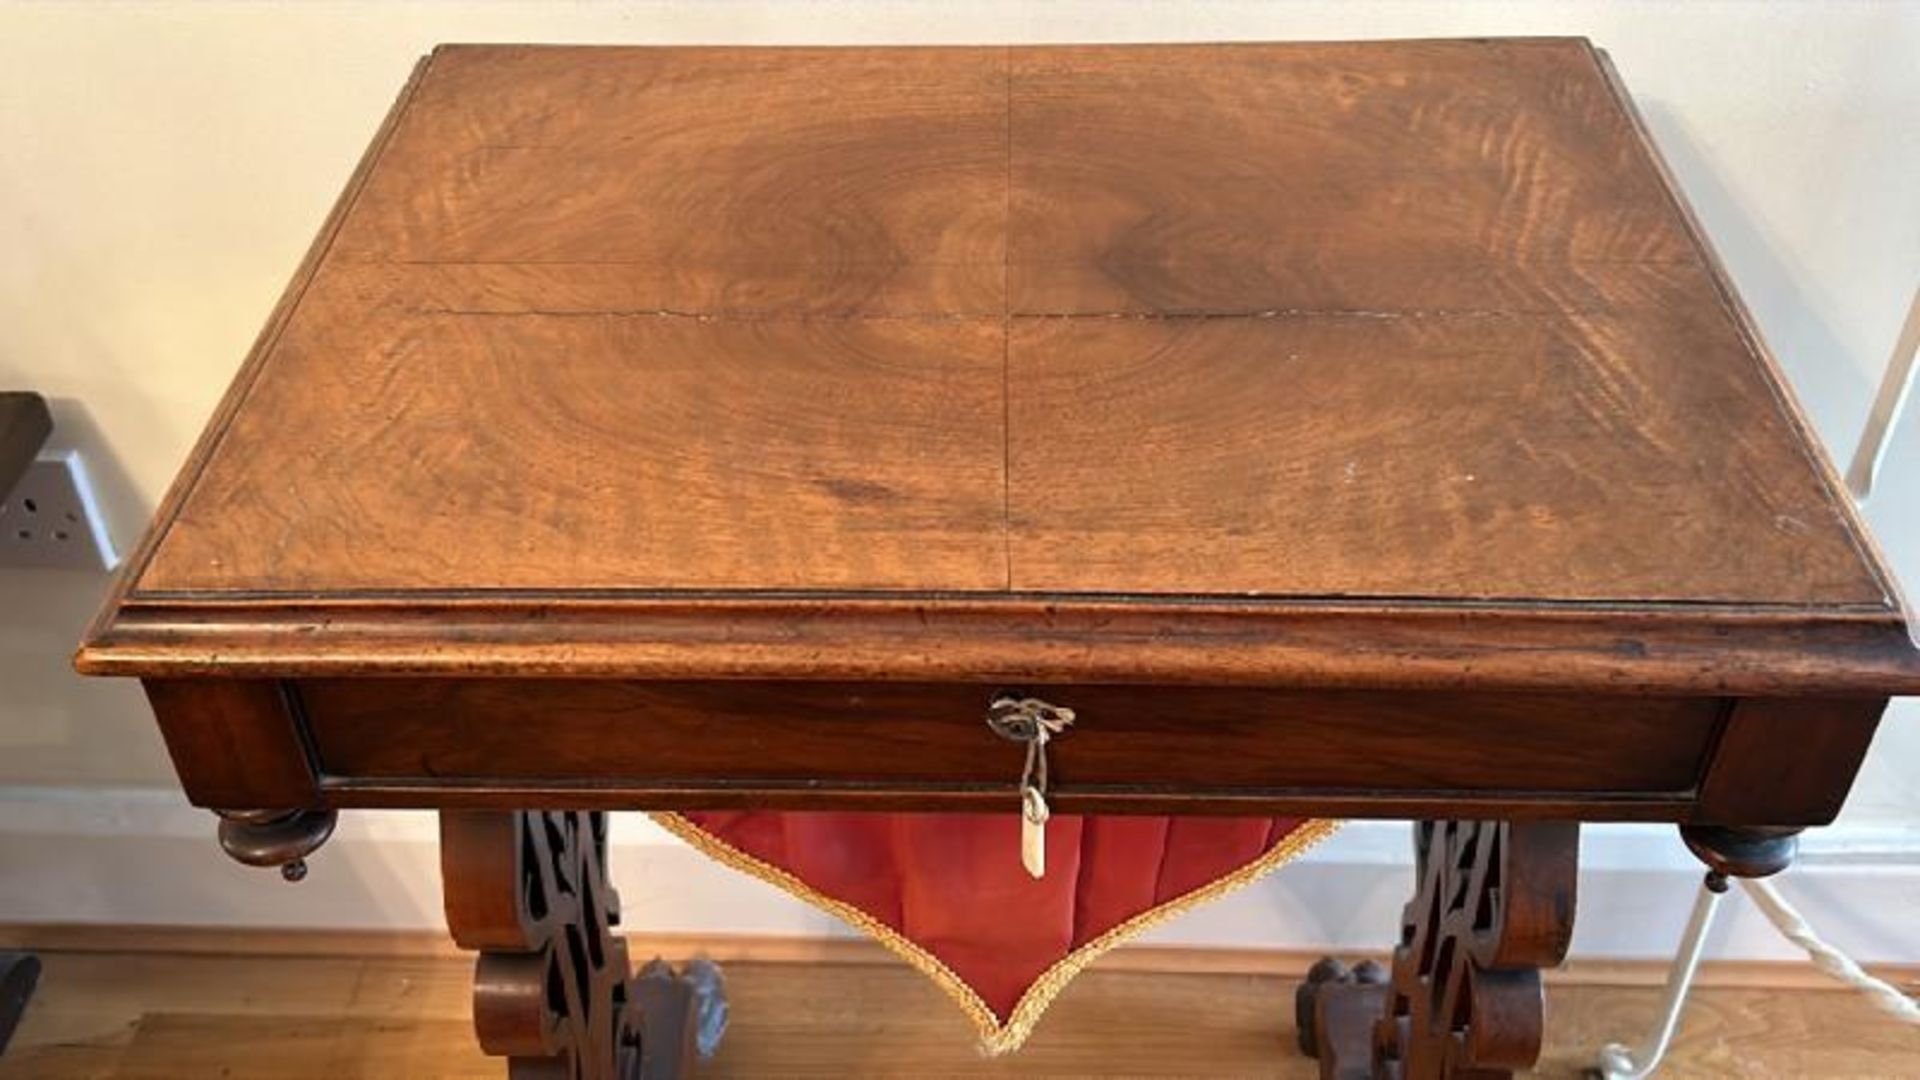 Antique walnut sewing table with sectional interior, clawed feet on casters and working lock with - Image 2 of 7